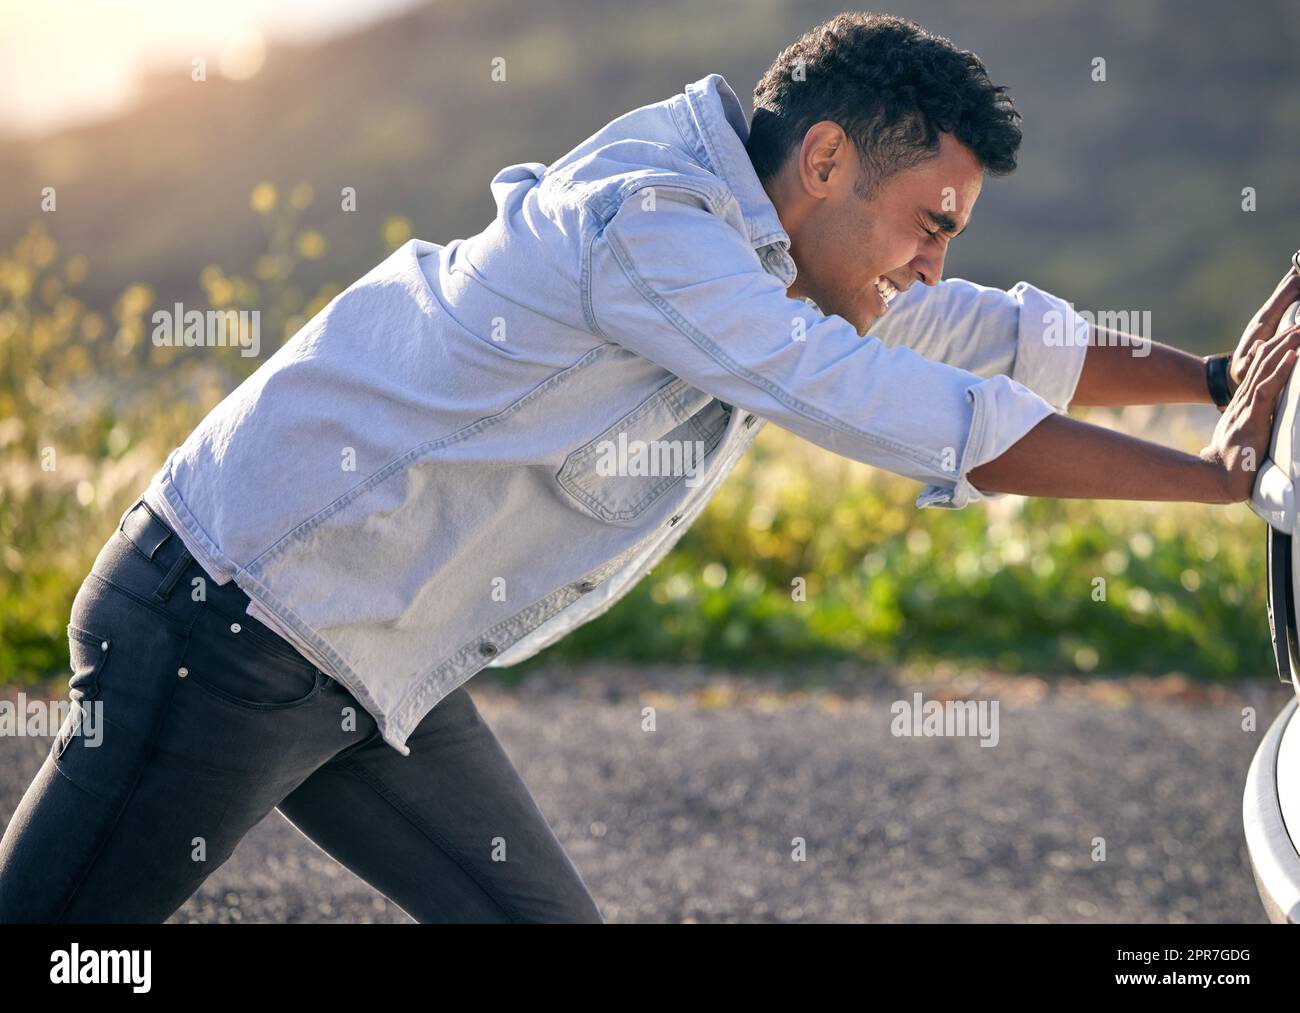 Can I push start her. Cropped shot of a handdsome young man pushing his car after suffering a vehicle breakdown. Stock Photo